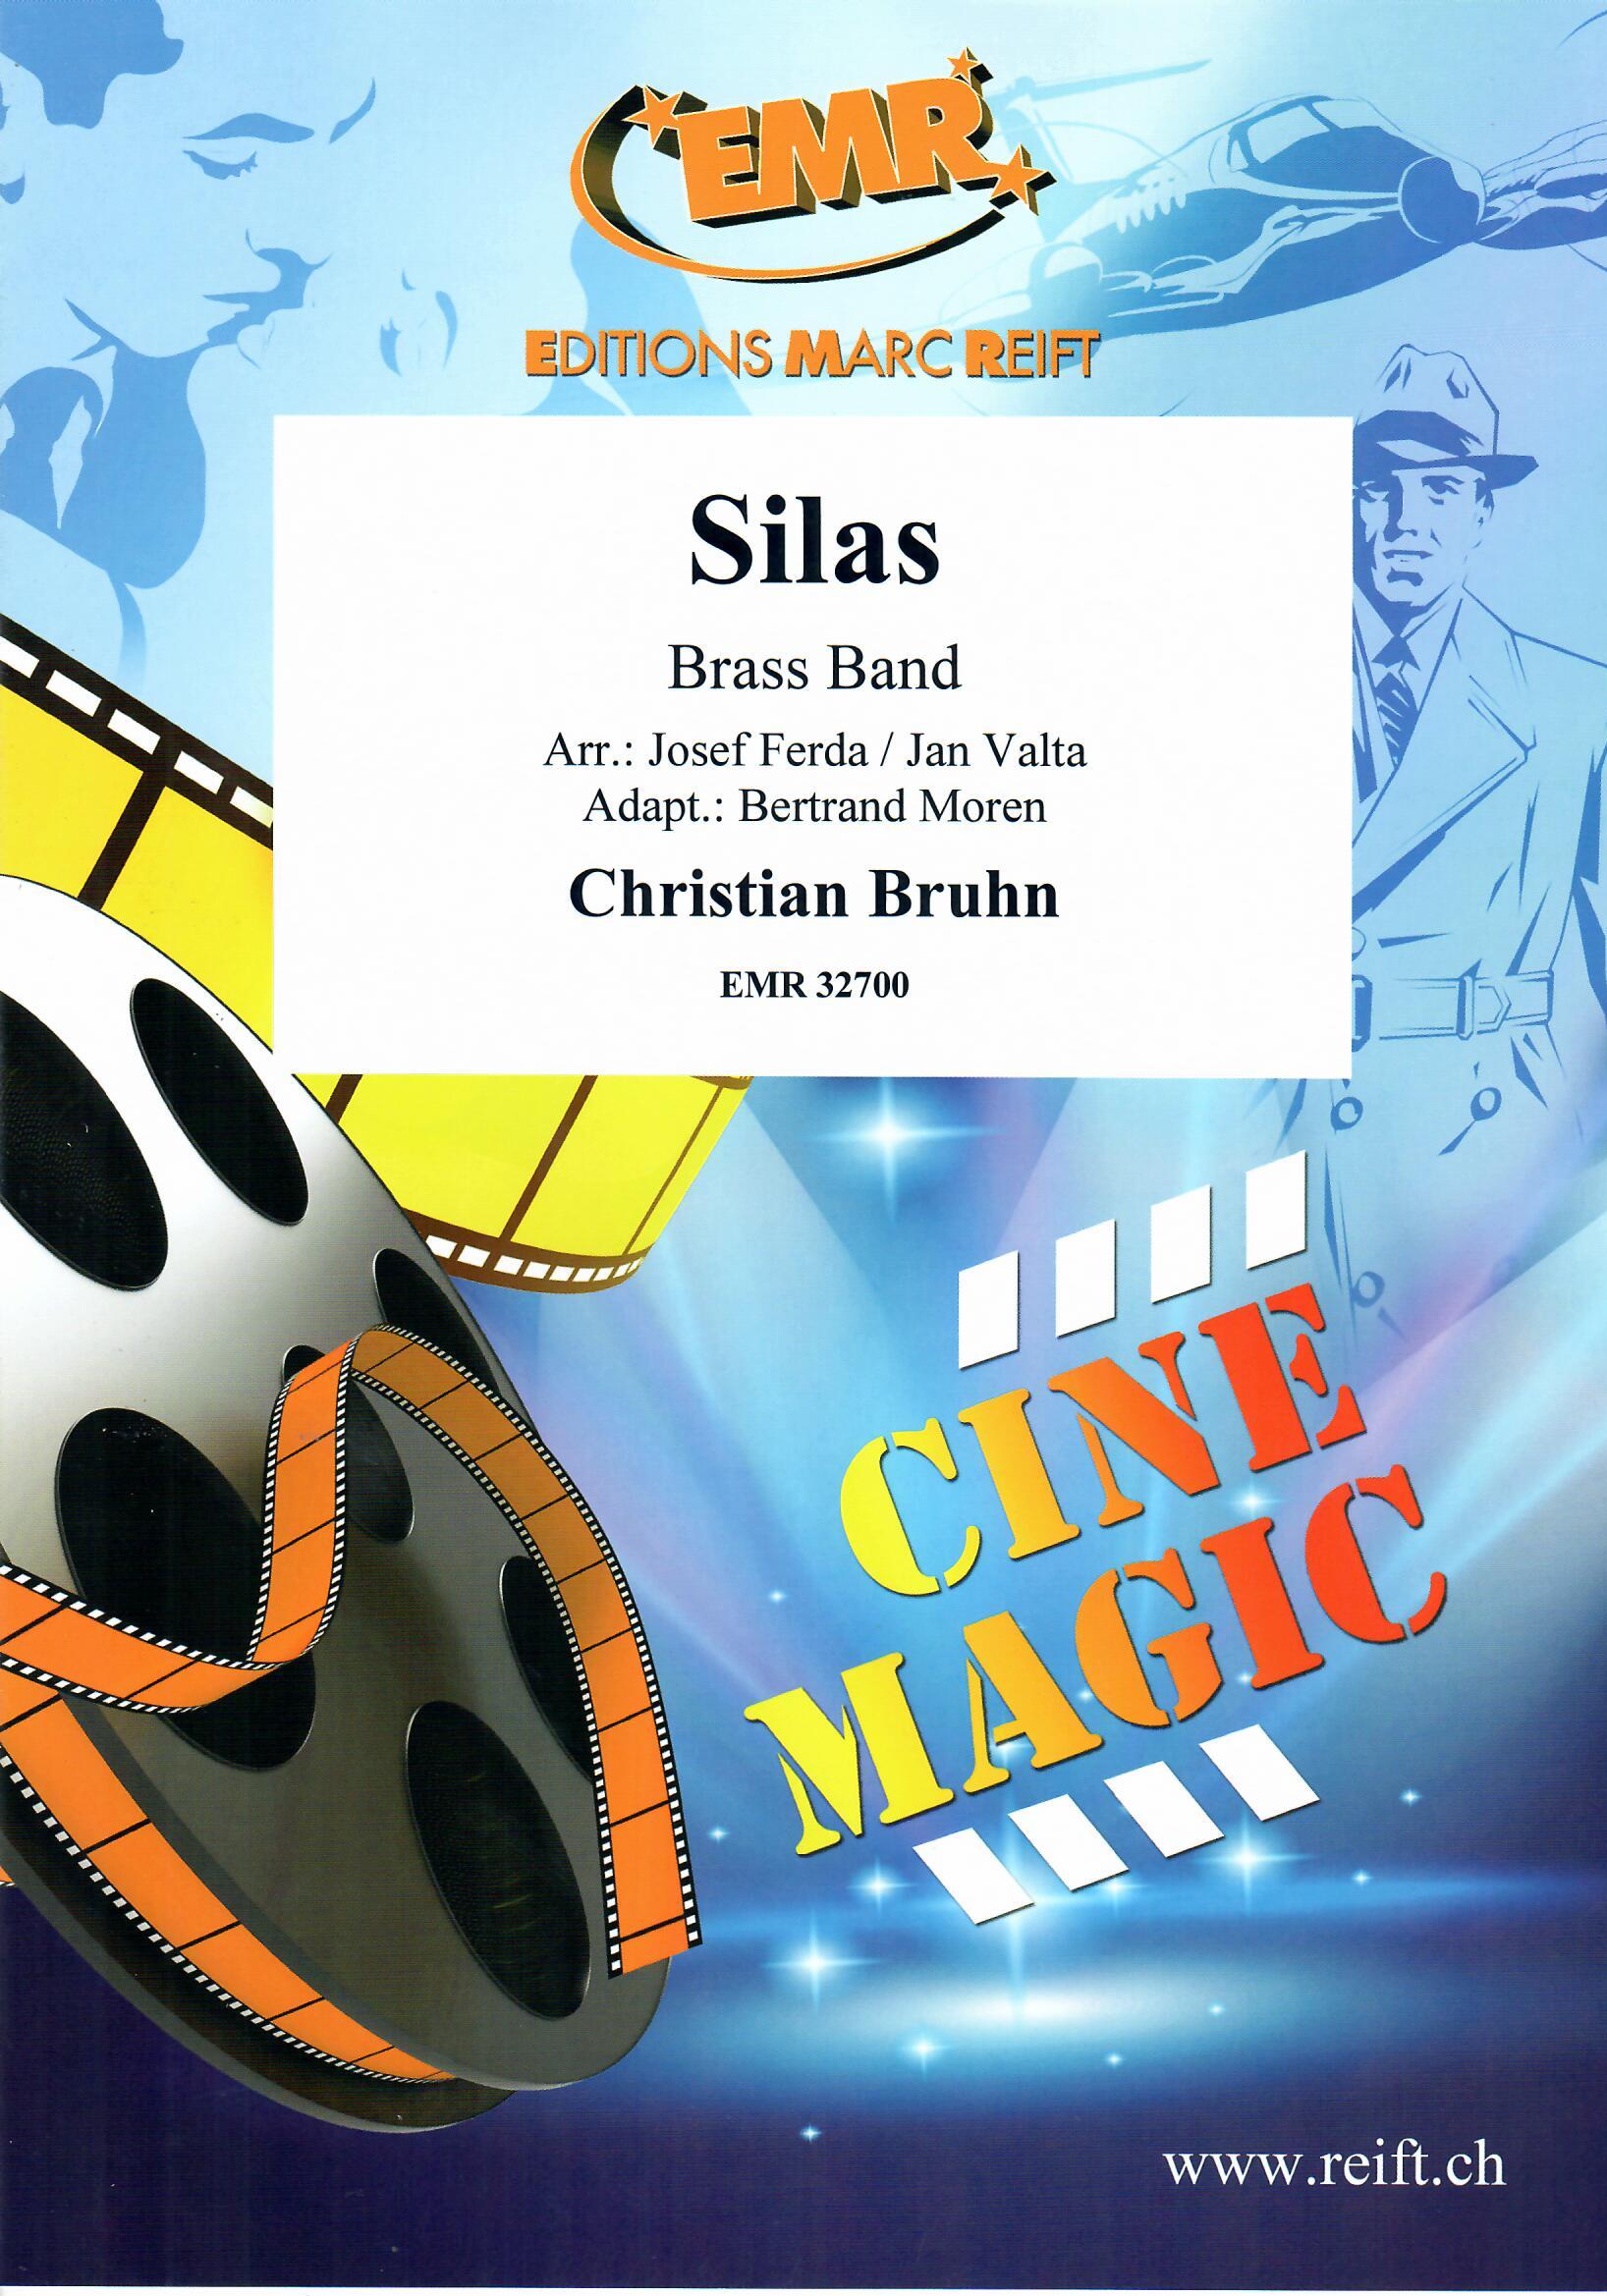 SILAS, NEW & RECENT Publications, FILM MUSIC & MUSICALS